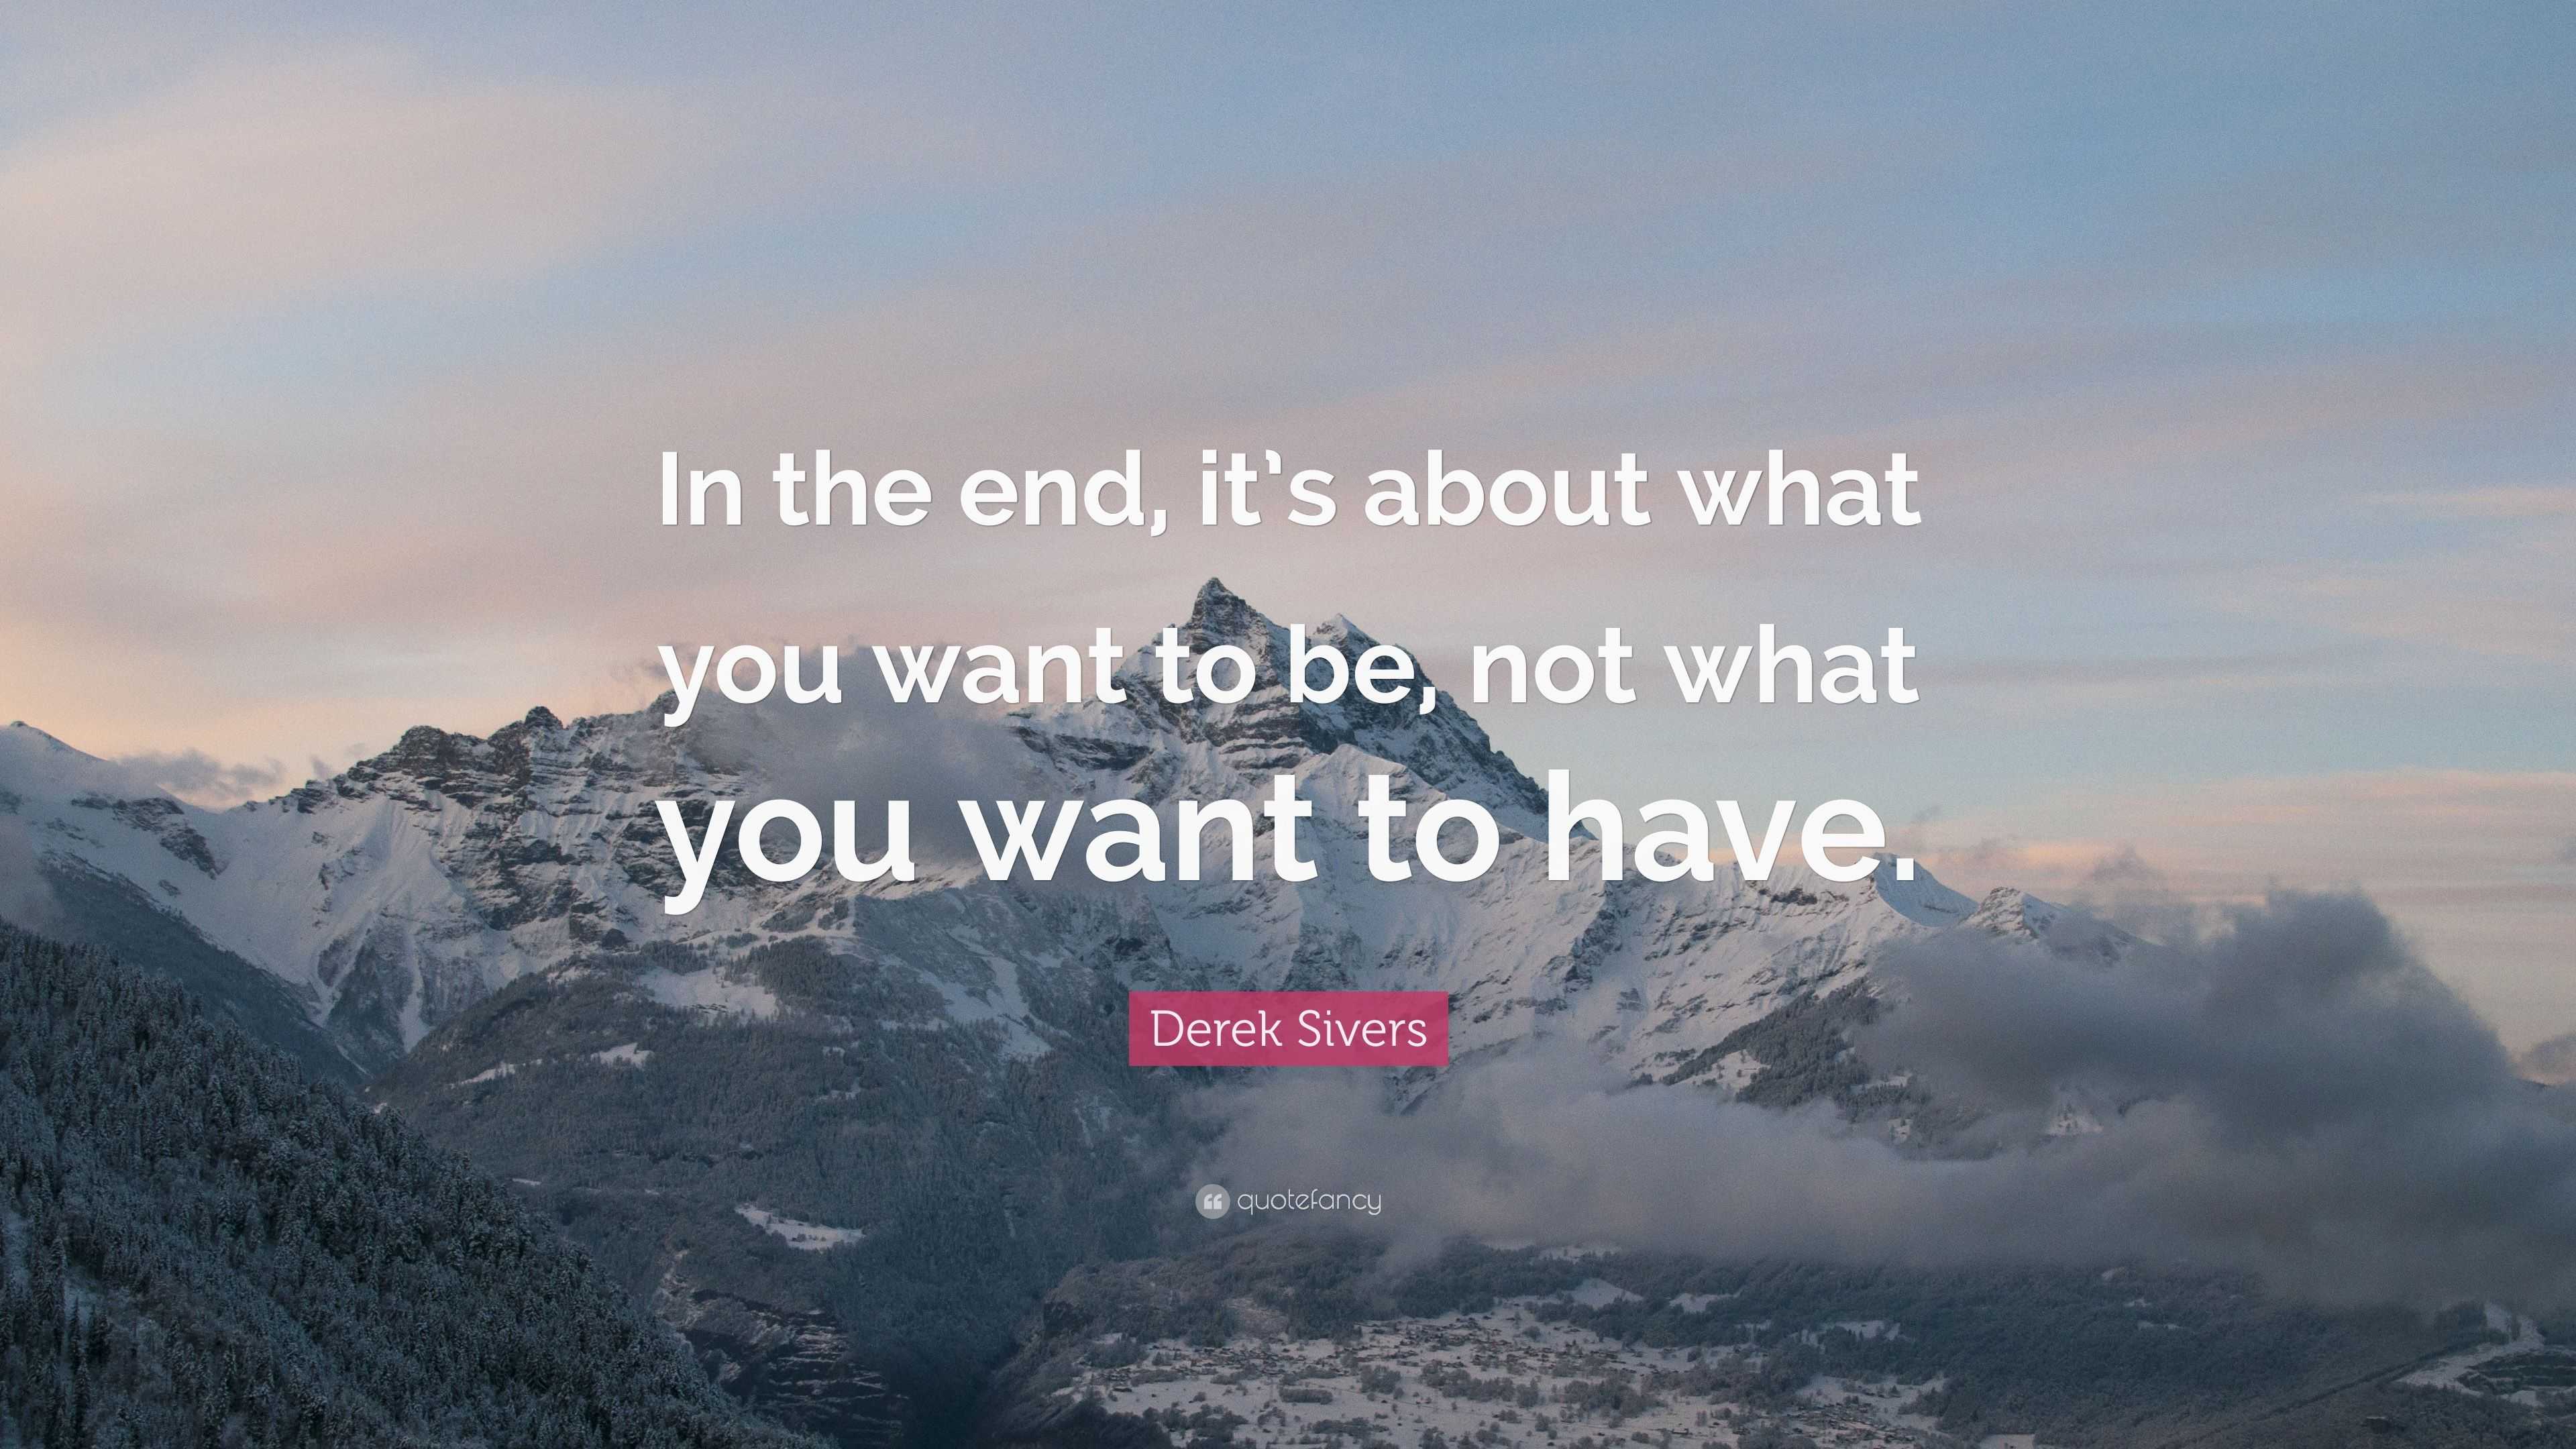 Derek Sivers Quote: “In the end, it’s about what you want to be, not ...